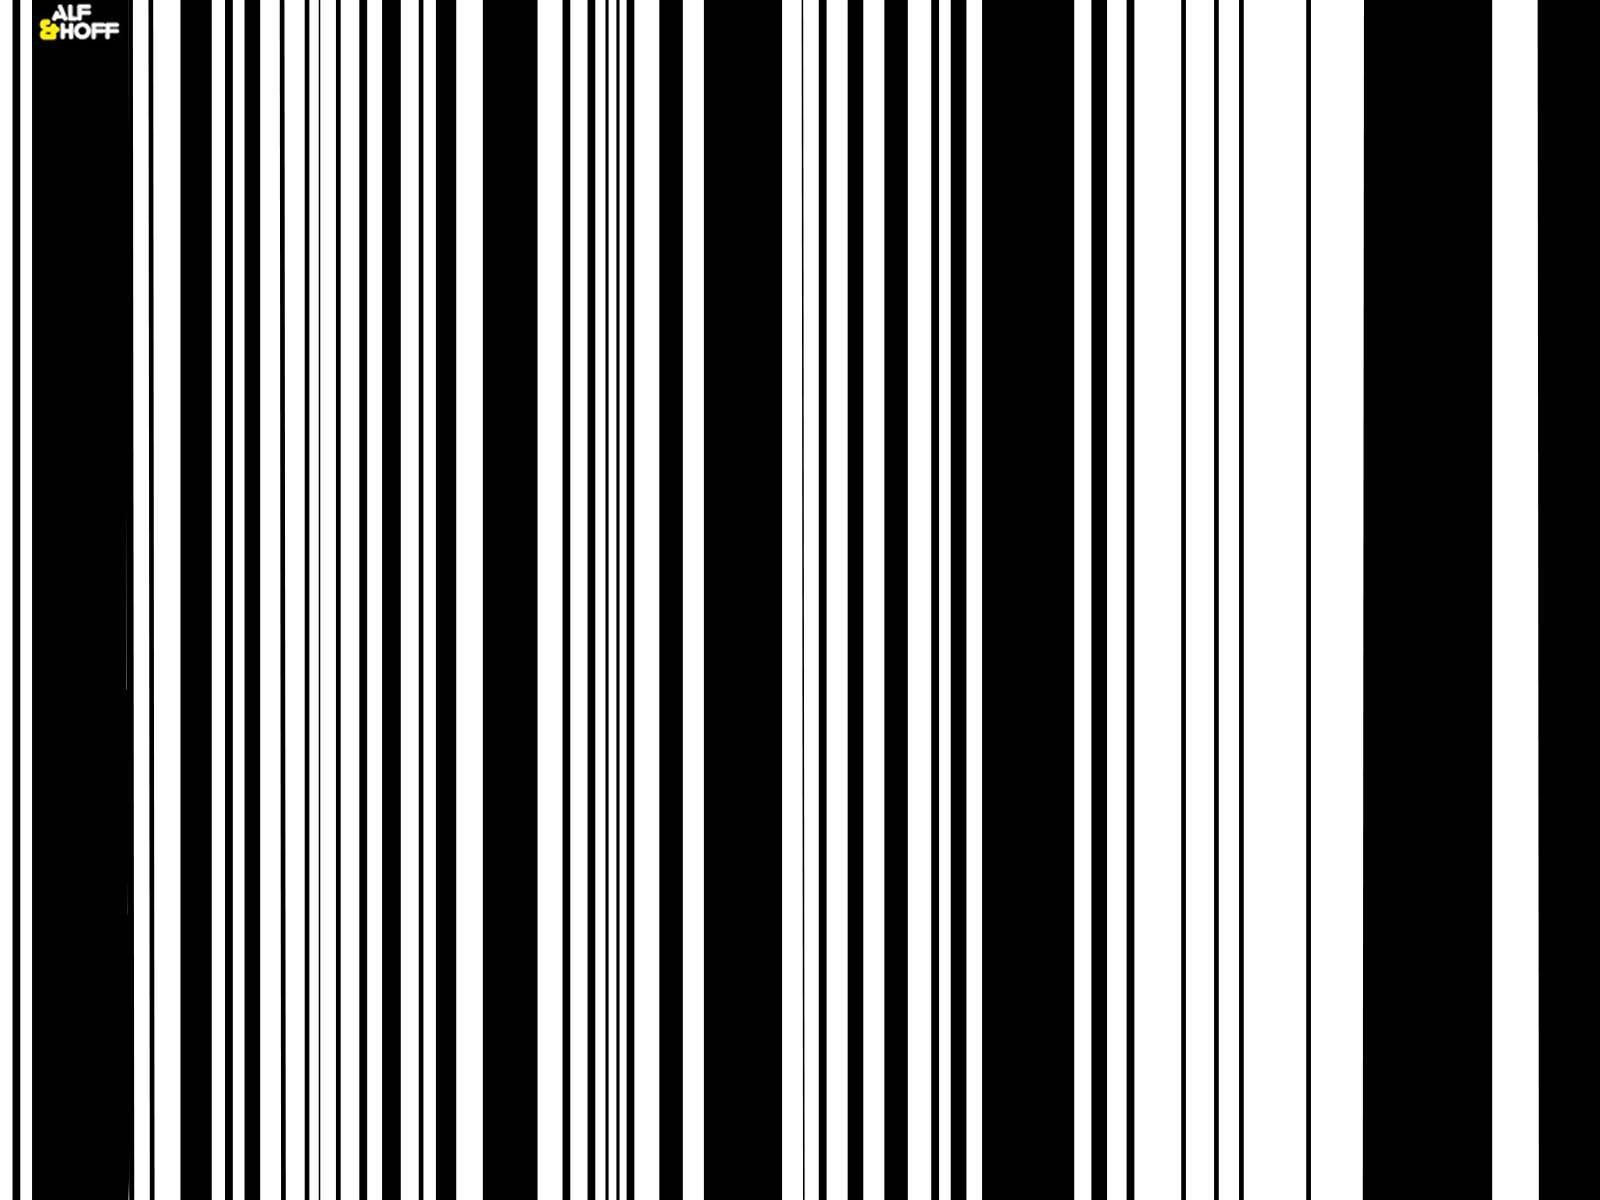 1K Barcode Pictures  Download Free Images on Unsplash